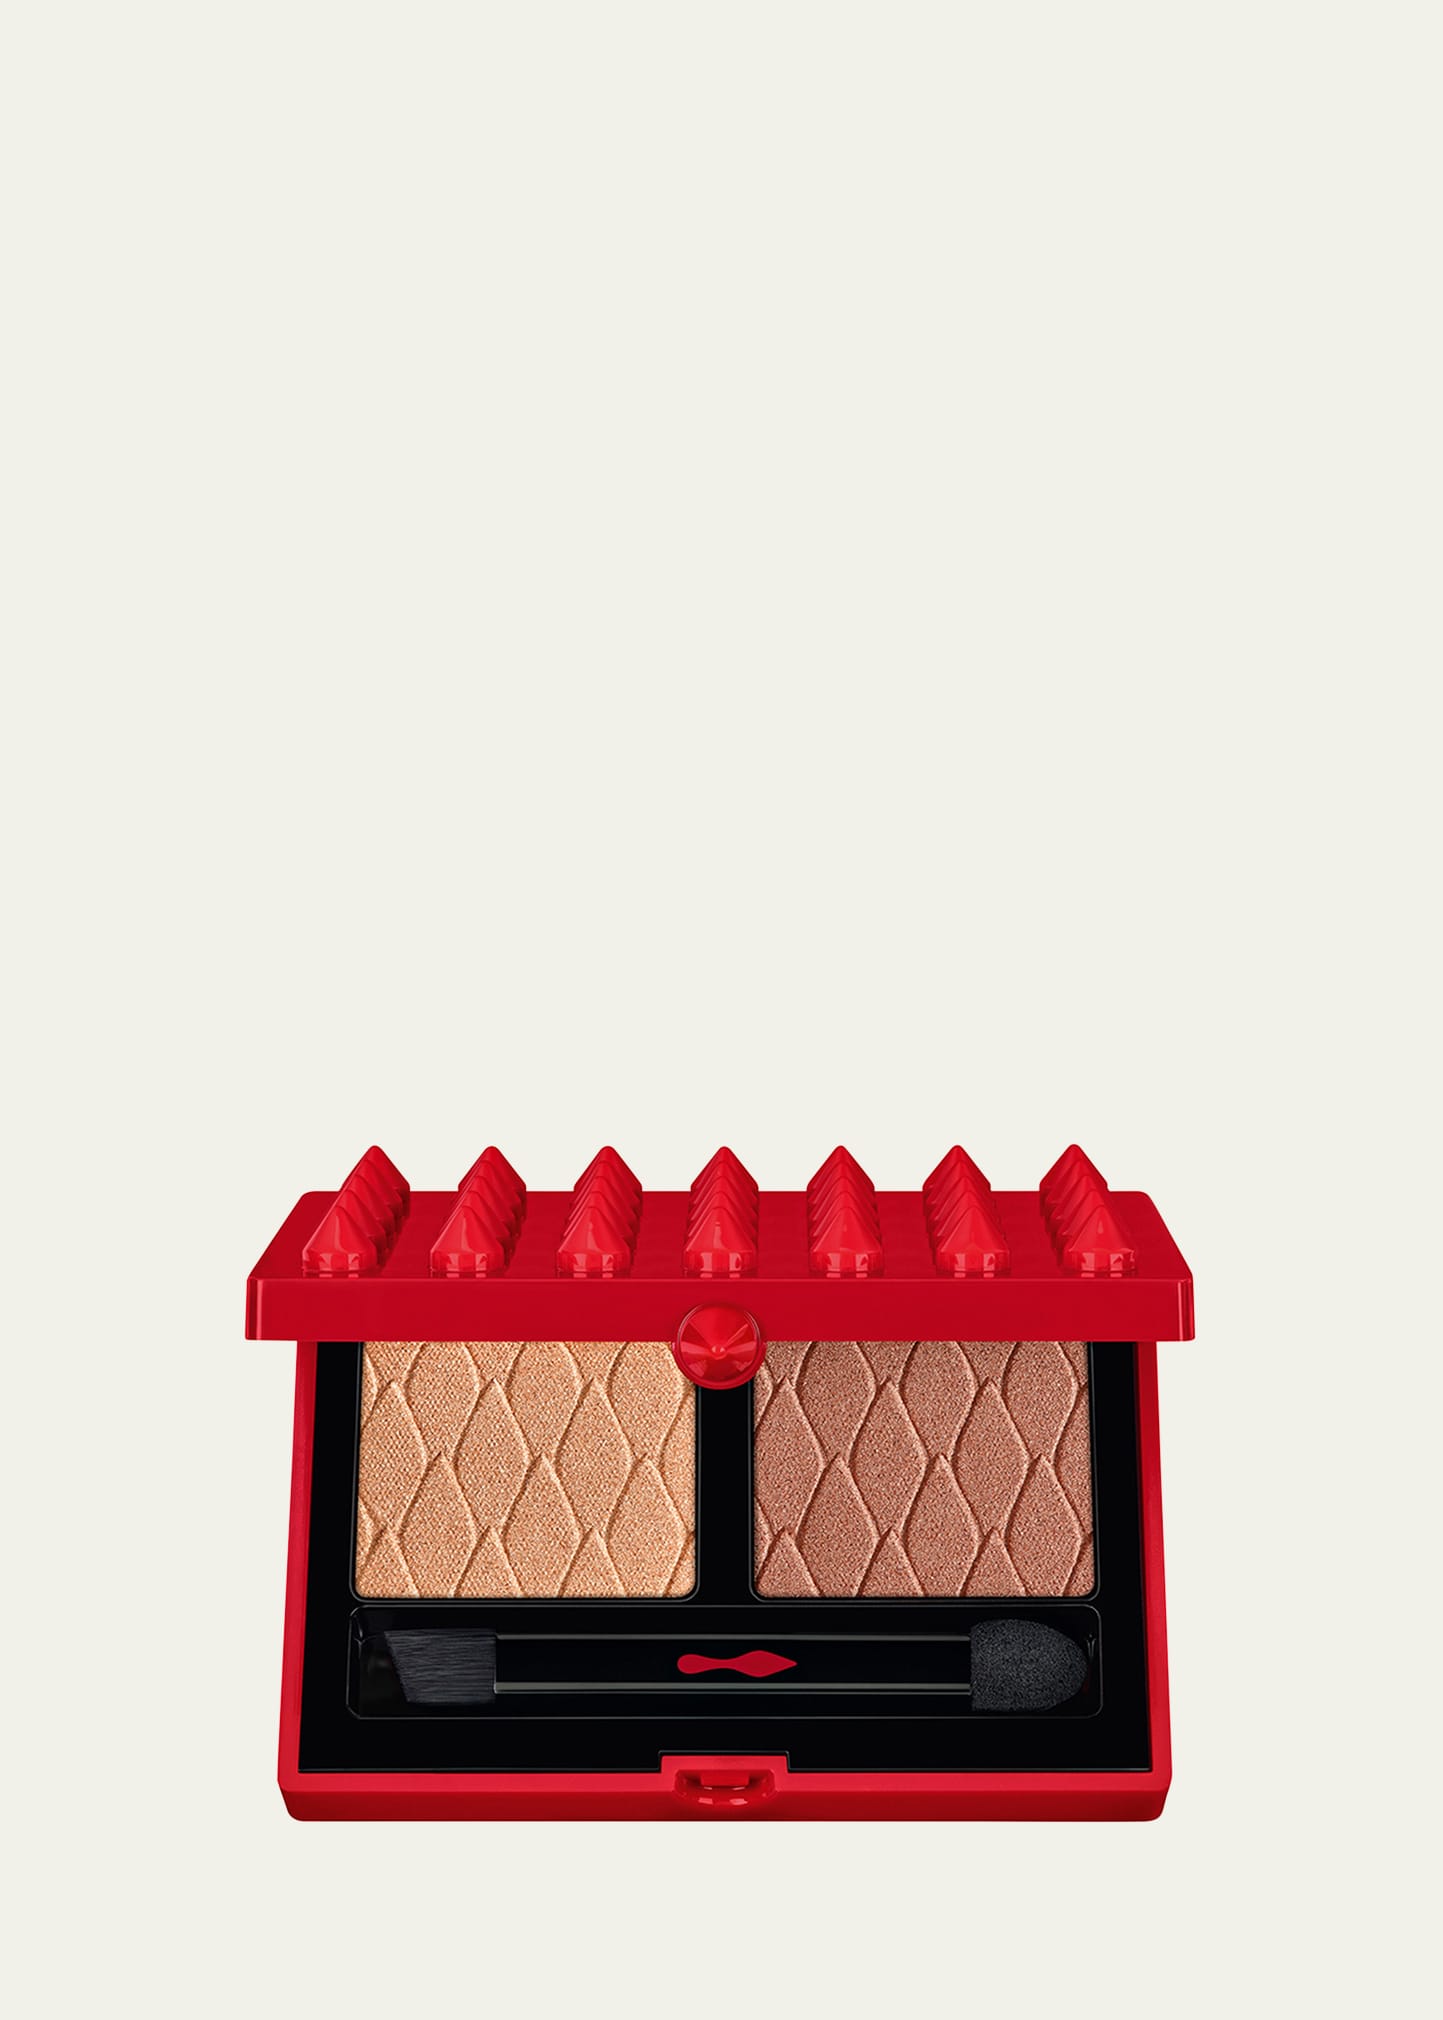 Christian Louboutin Abracadabra Eyeshadow Duo Palette In Hot Nudes Chick